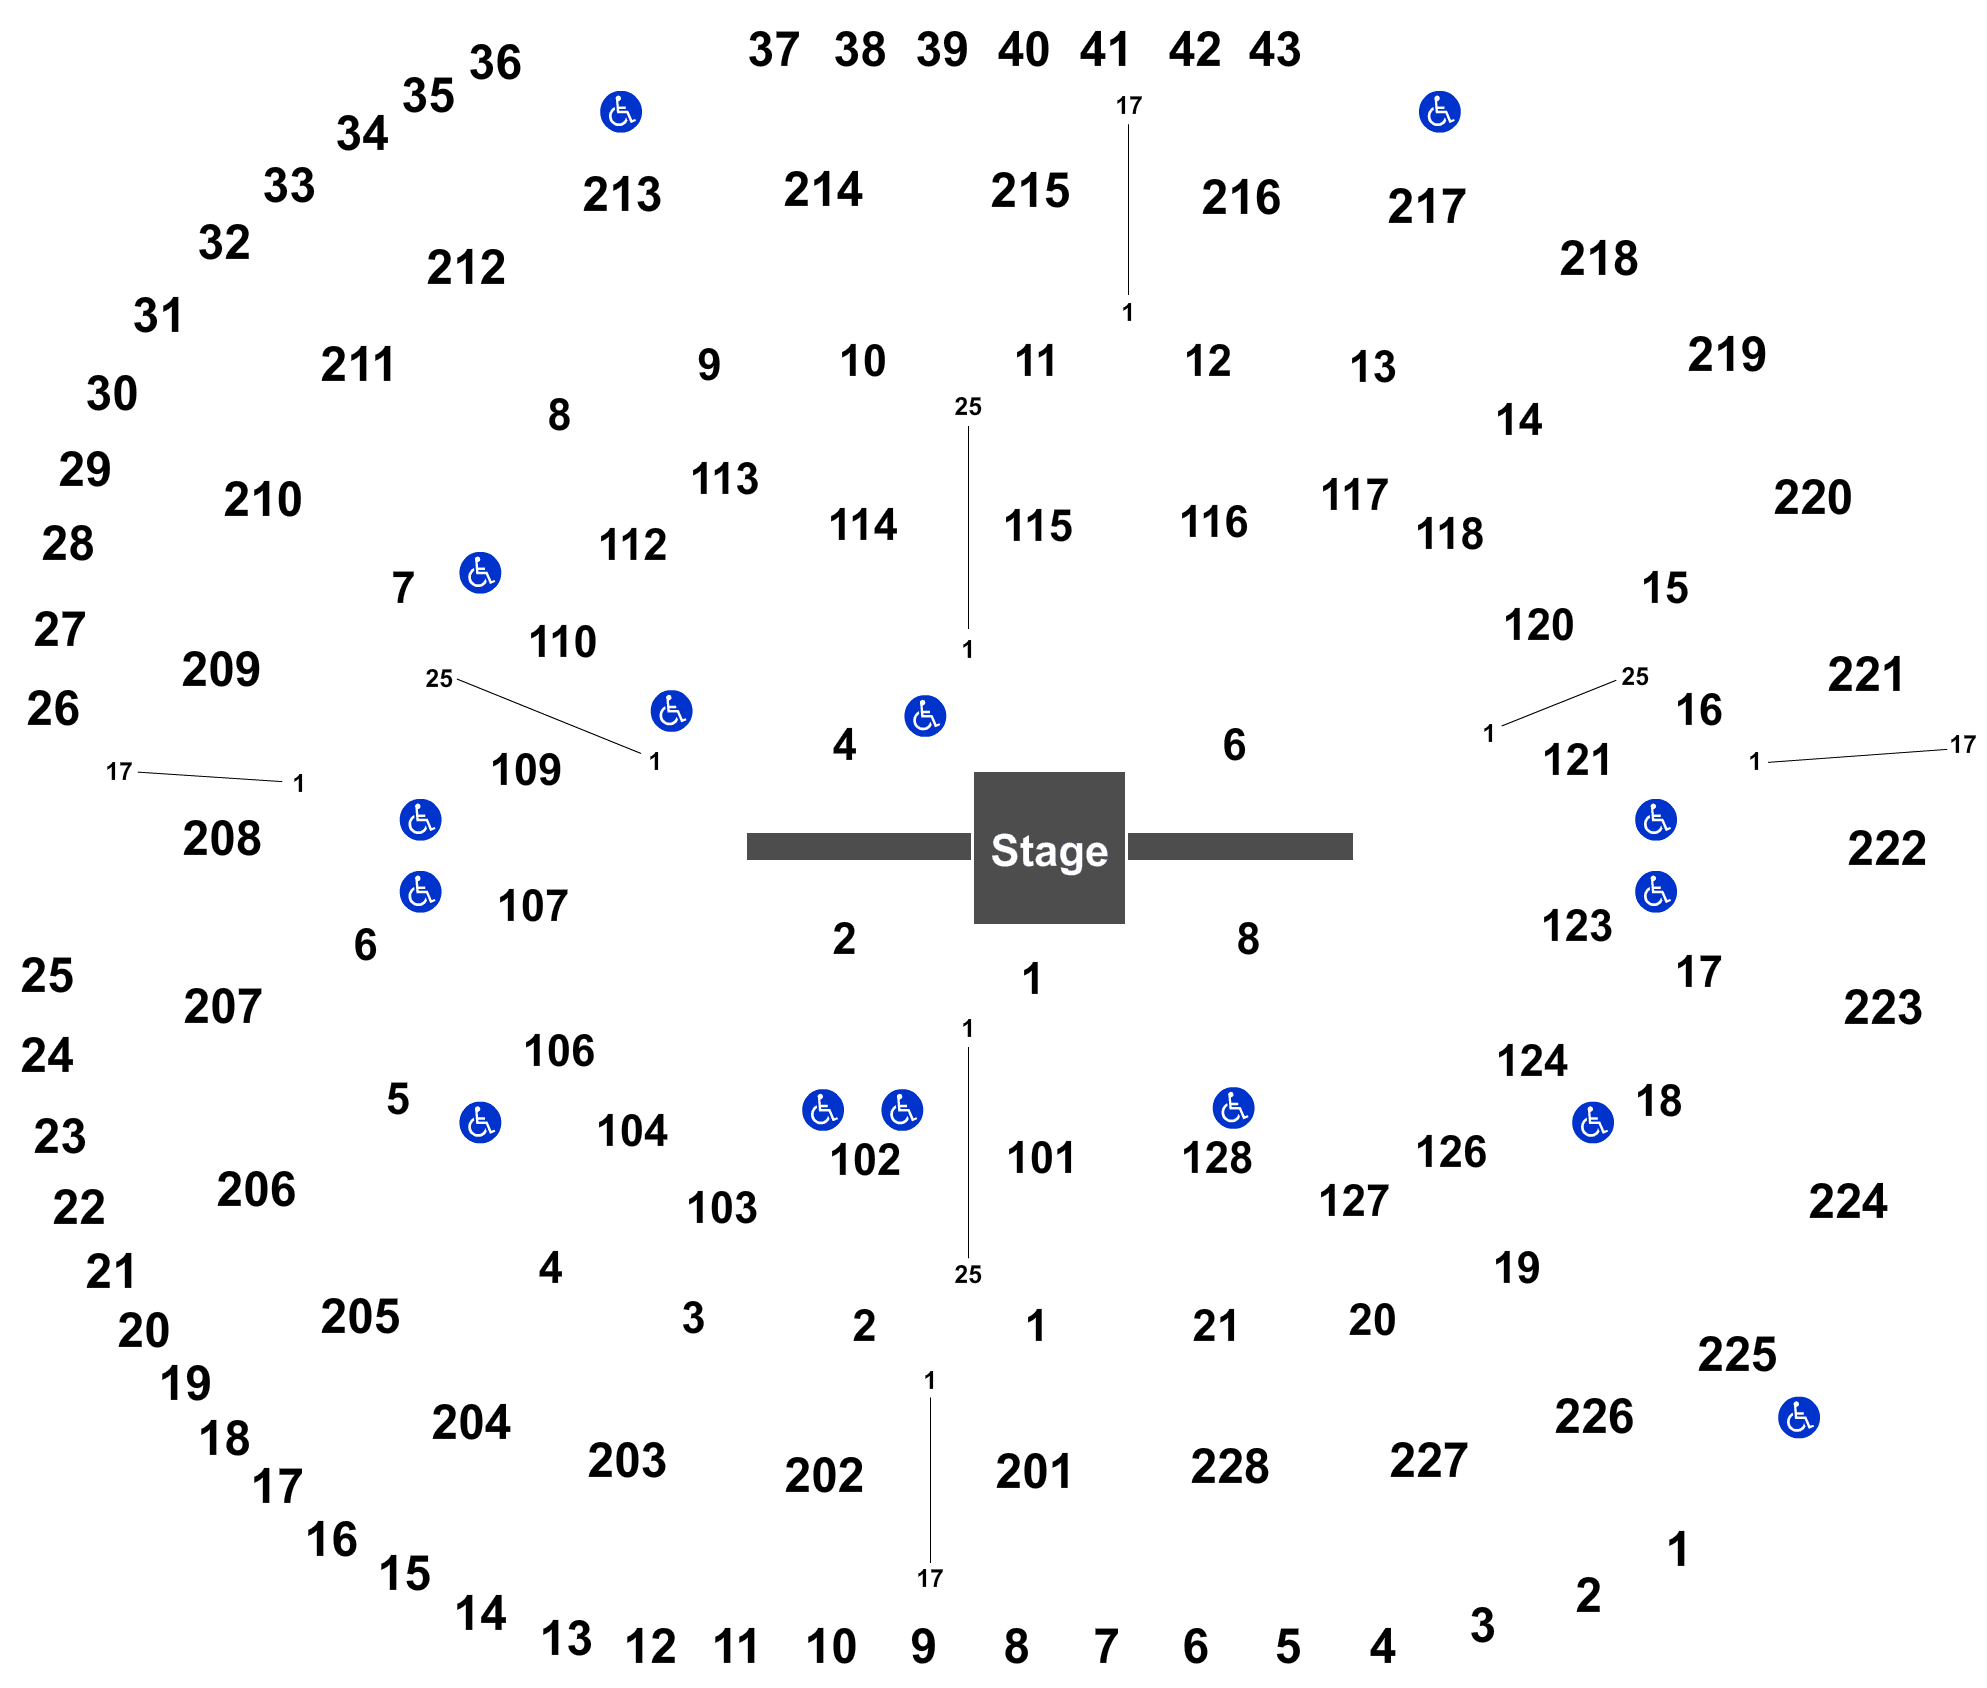 Section 222 at SAP Center 